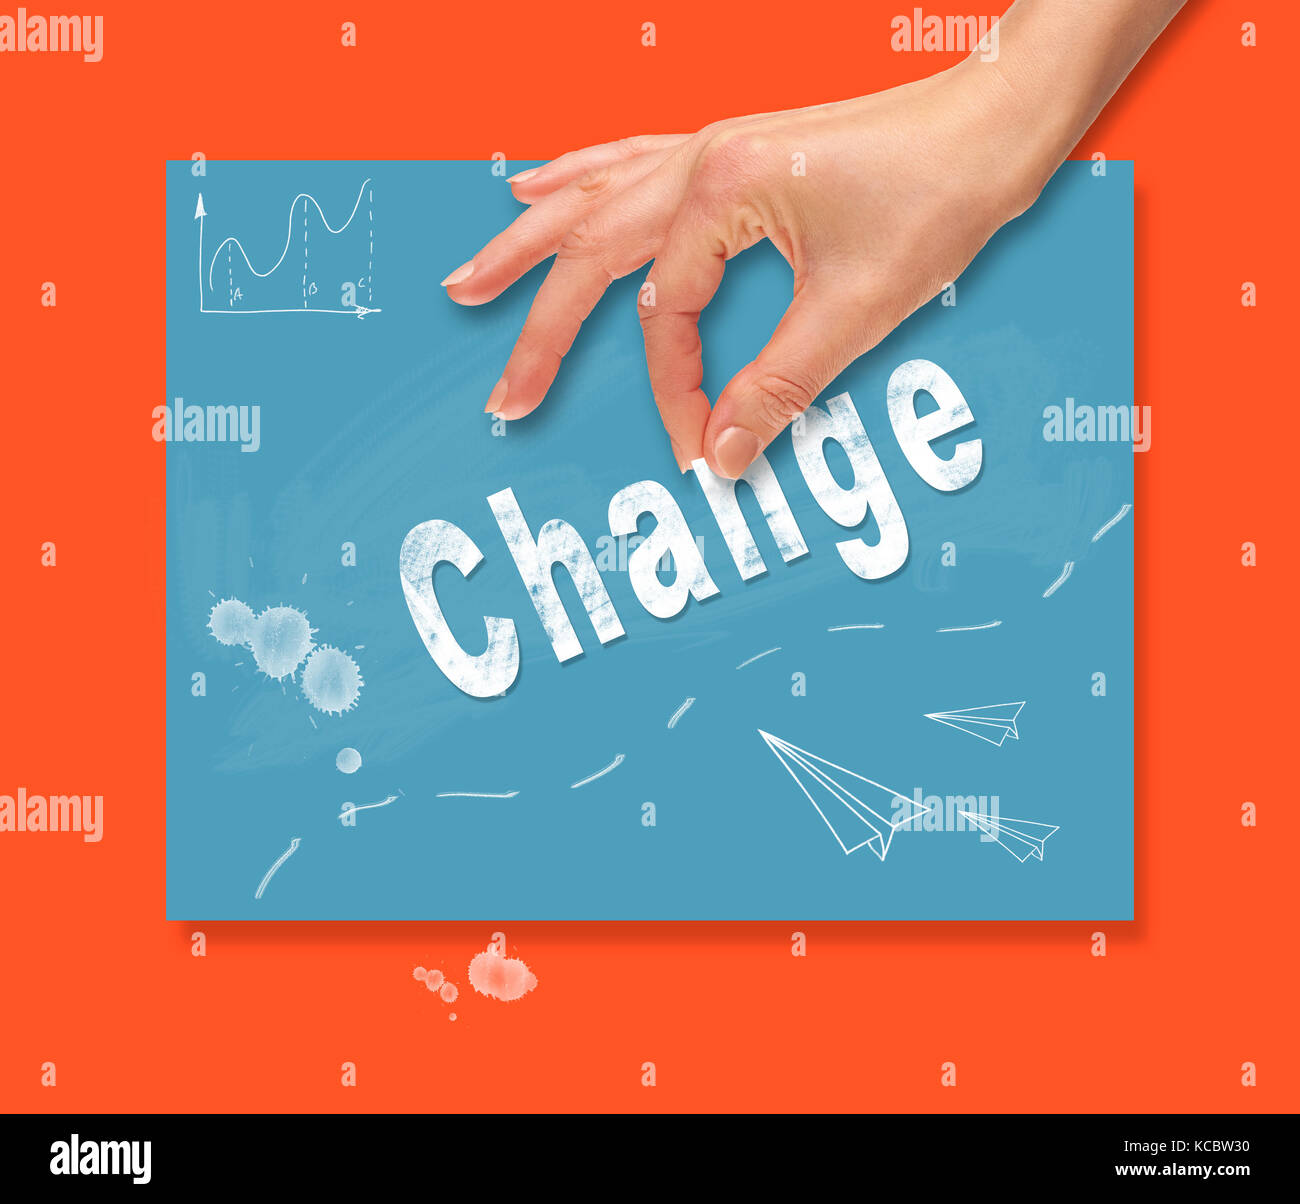 A hand picking up a Change concept on a colorful drawing board. Stock Photo